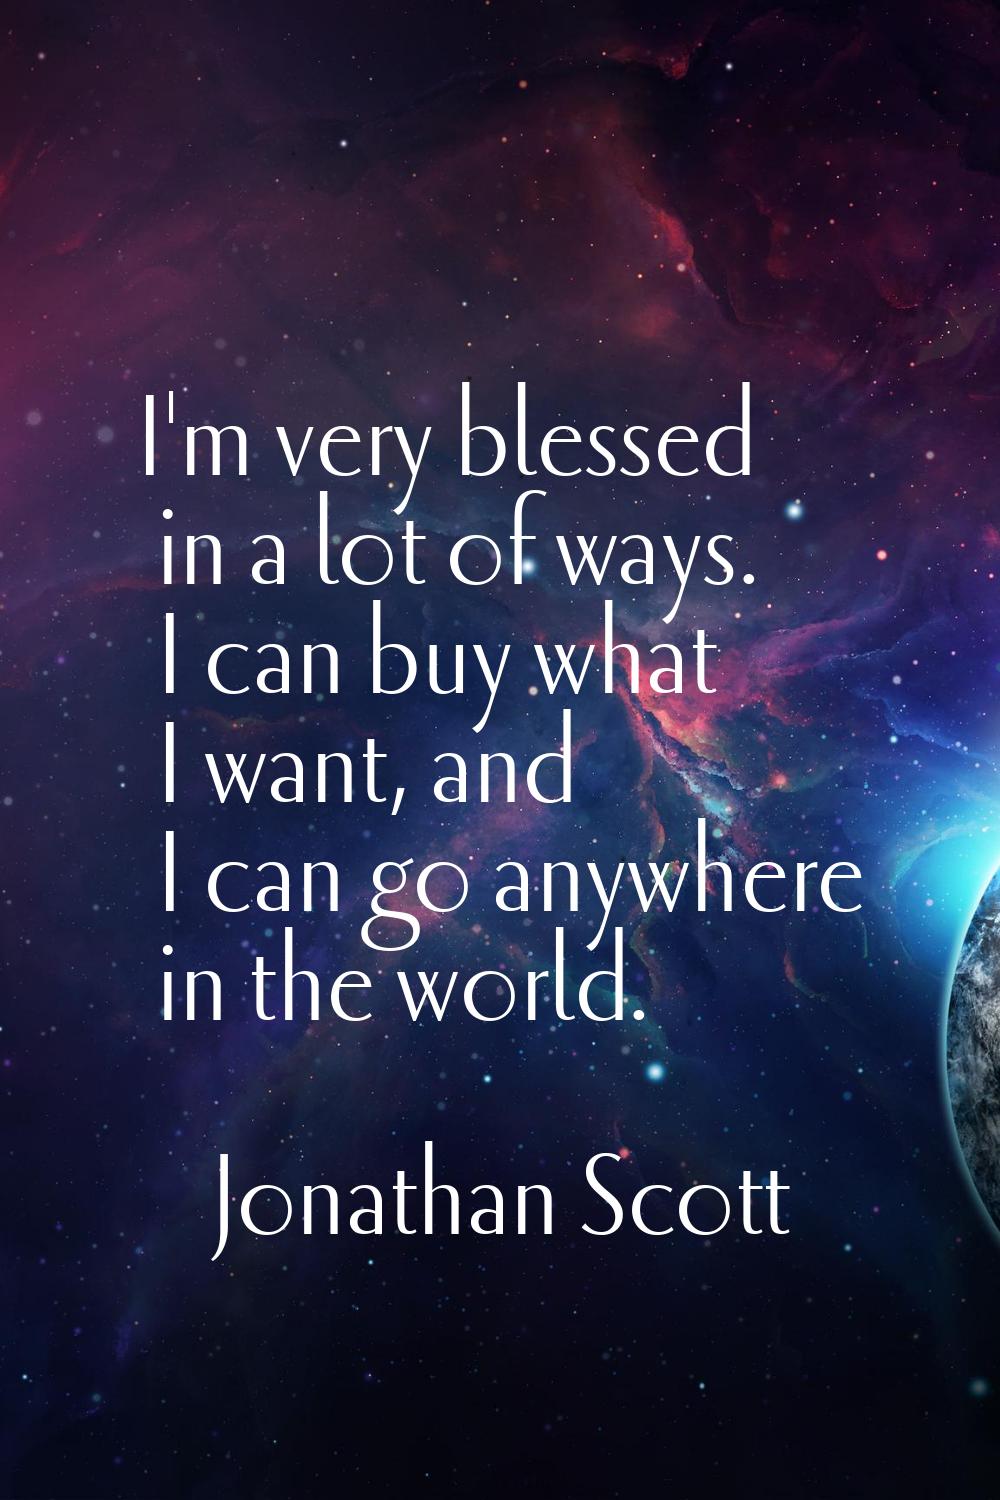 I'm very blessed in a lot of ways. I can buy what I want, and I can go anywhere in the world.